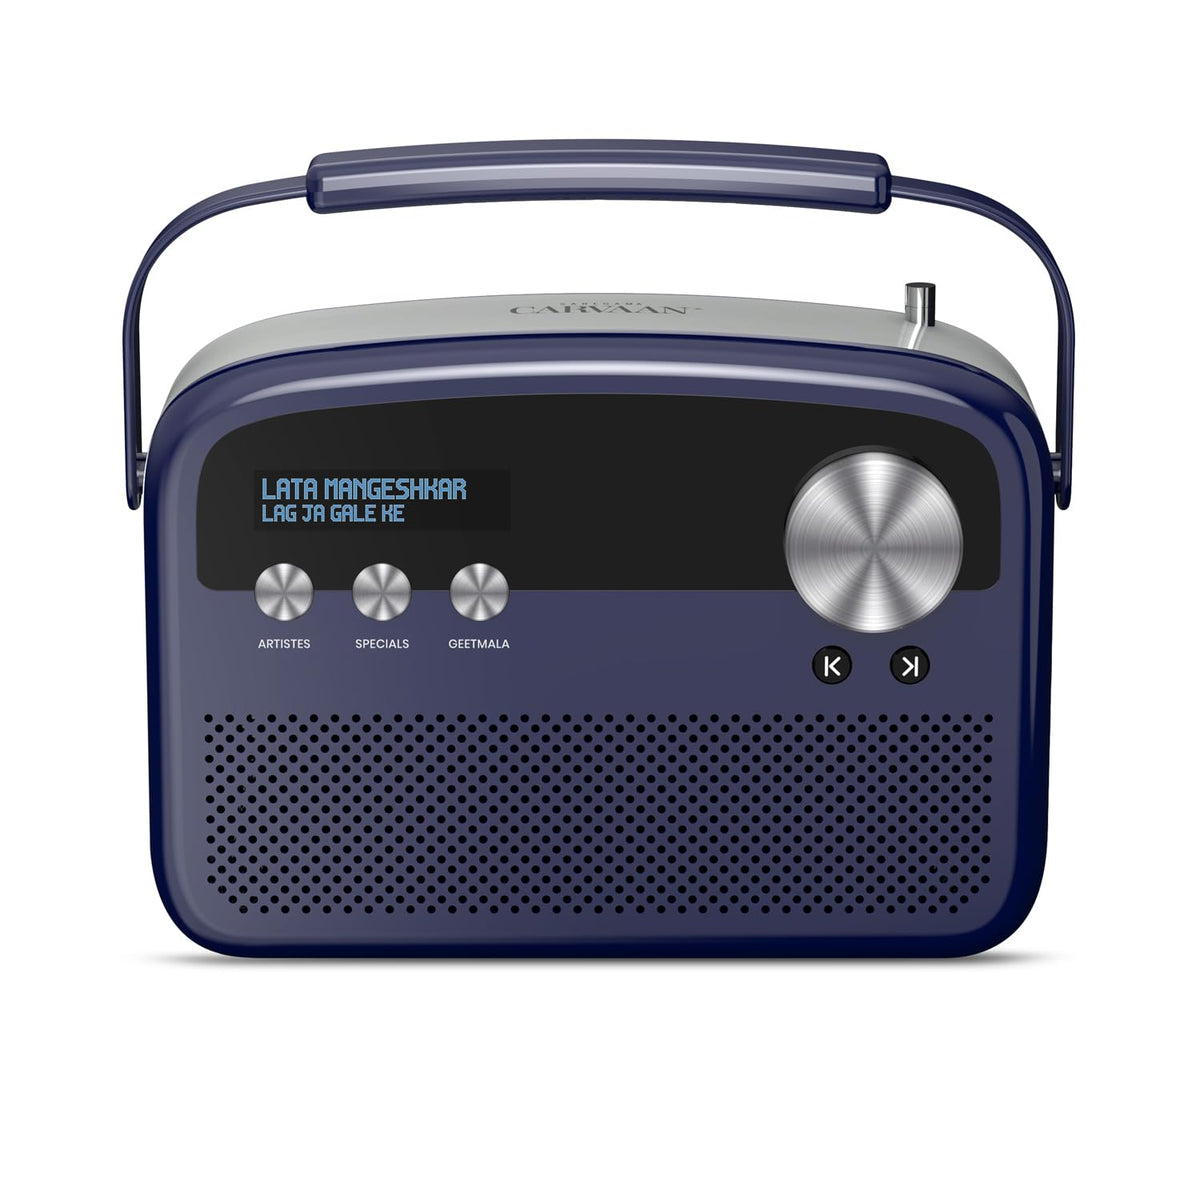 Saregama Carvaan Lite Hindi - Portable Music Player with 3000 Pre-Loaded Evergreen Songs, FM/BT/AUX